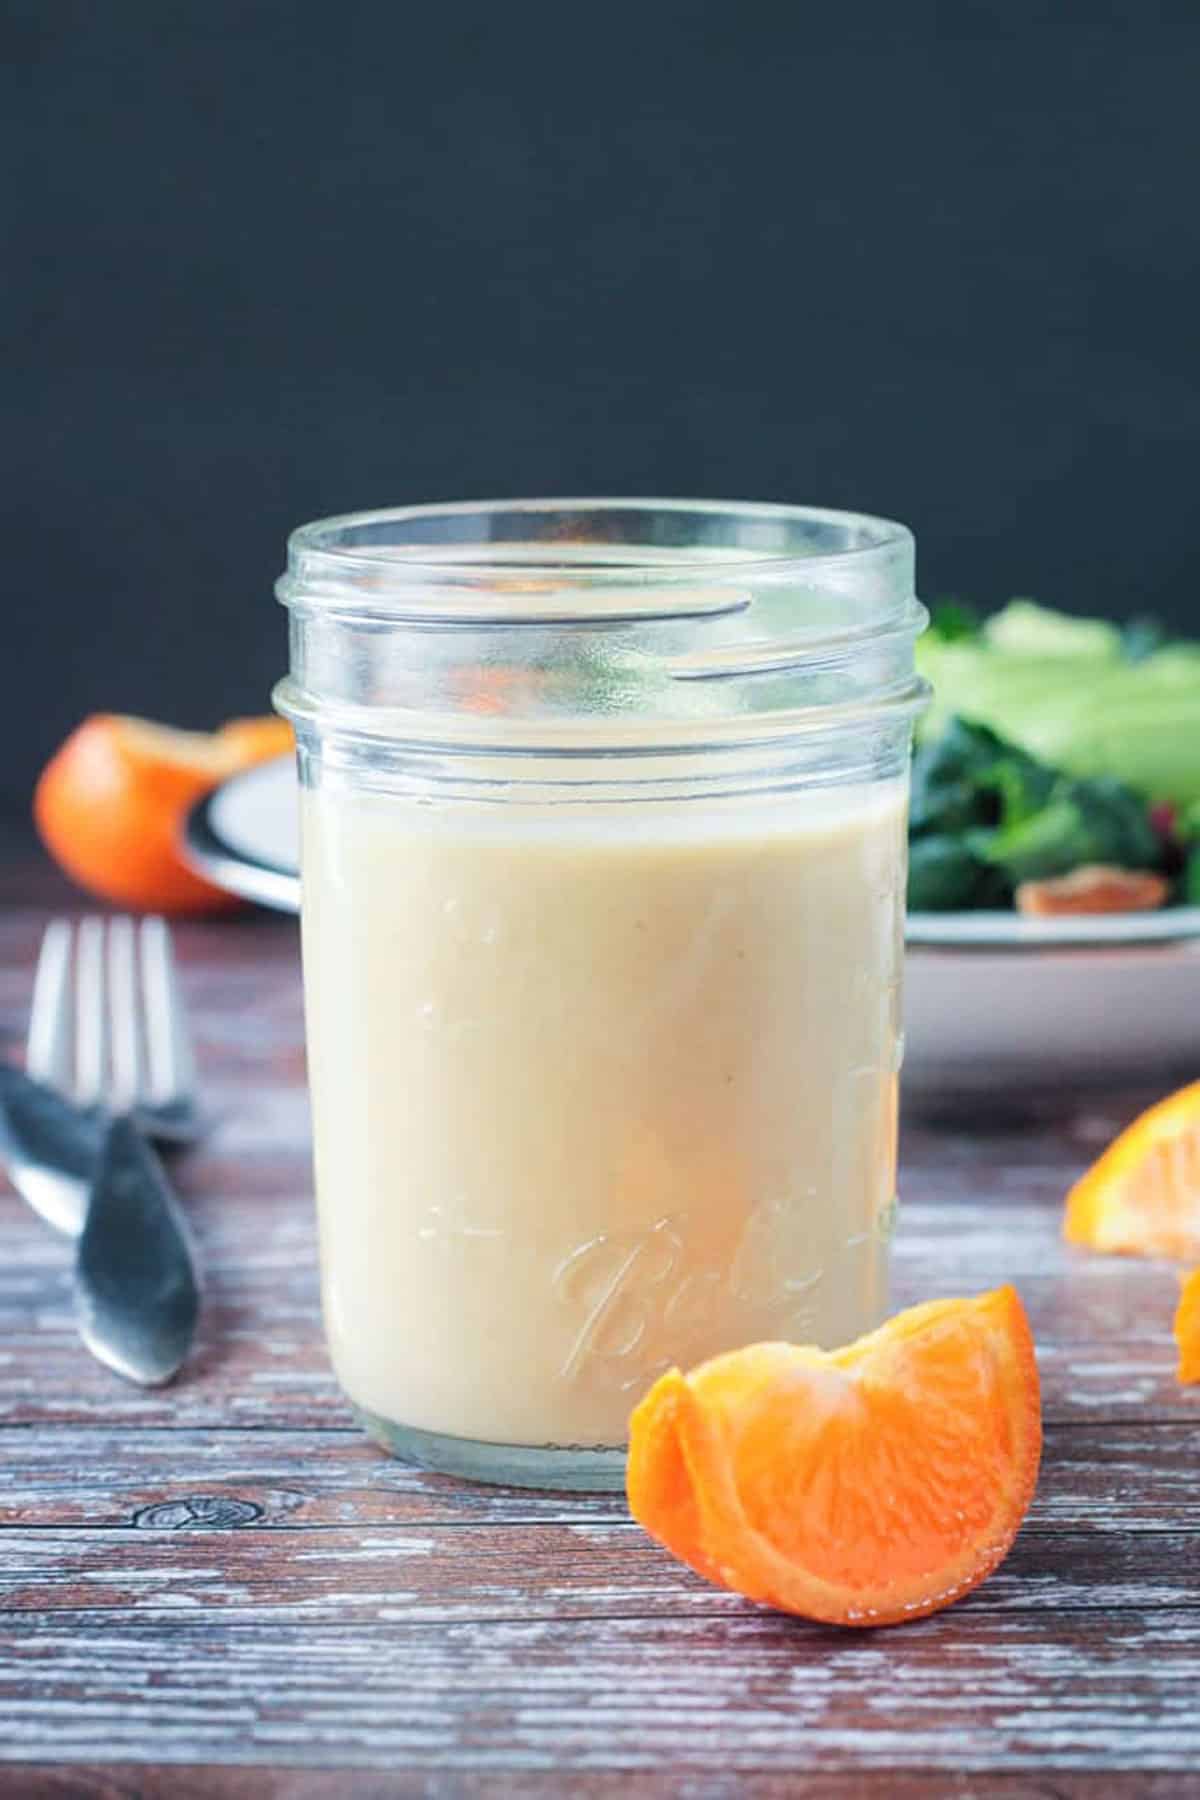 One orange wedge on a table in front of a glass jar of salad dressing.